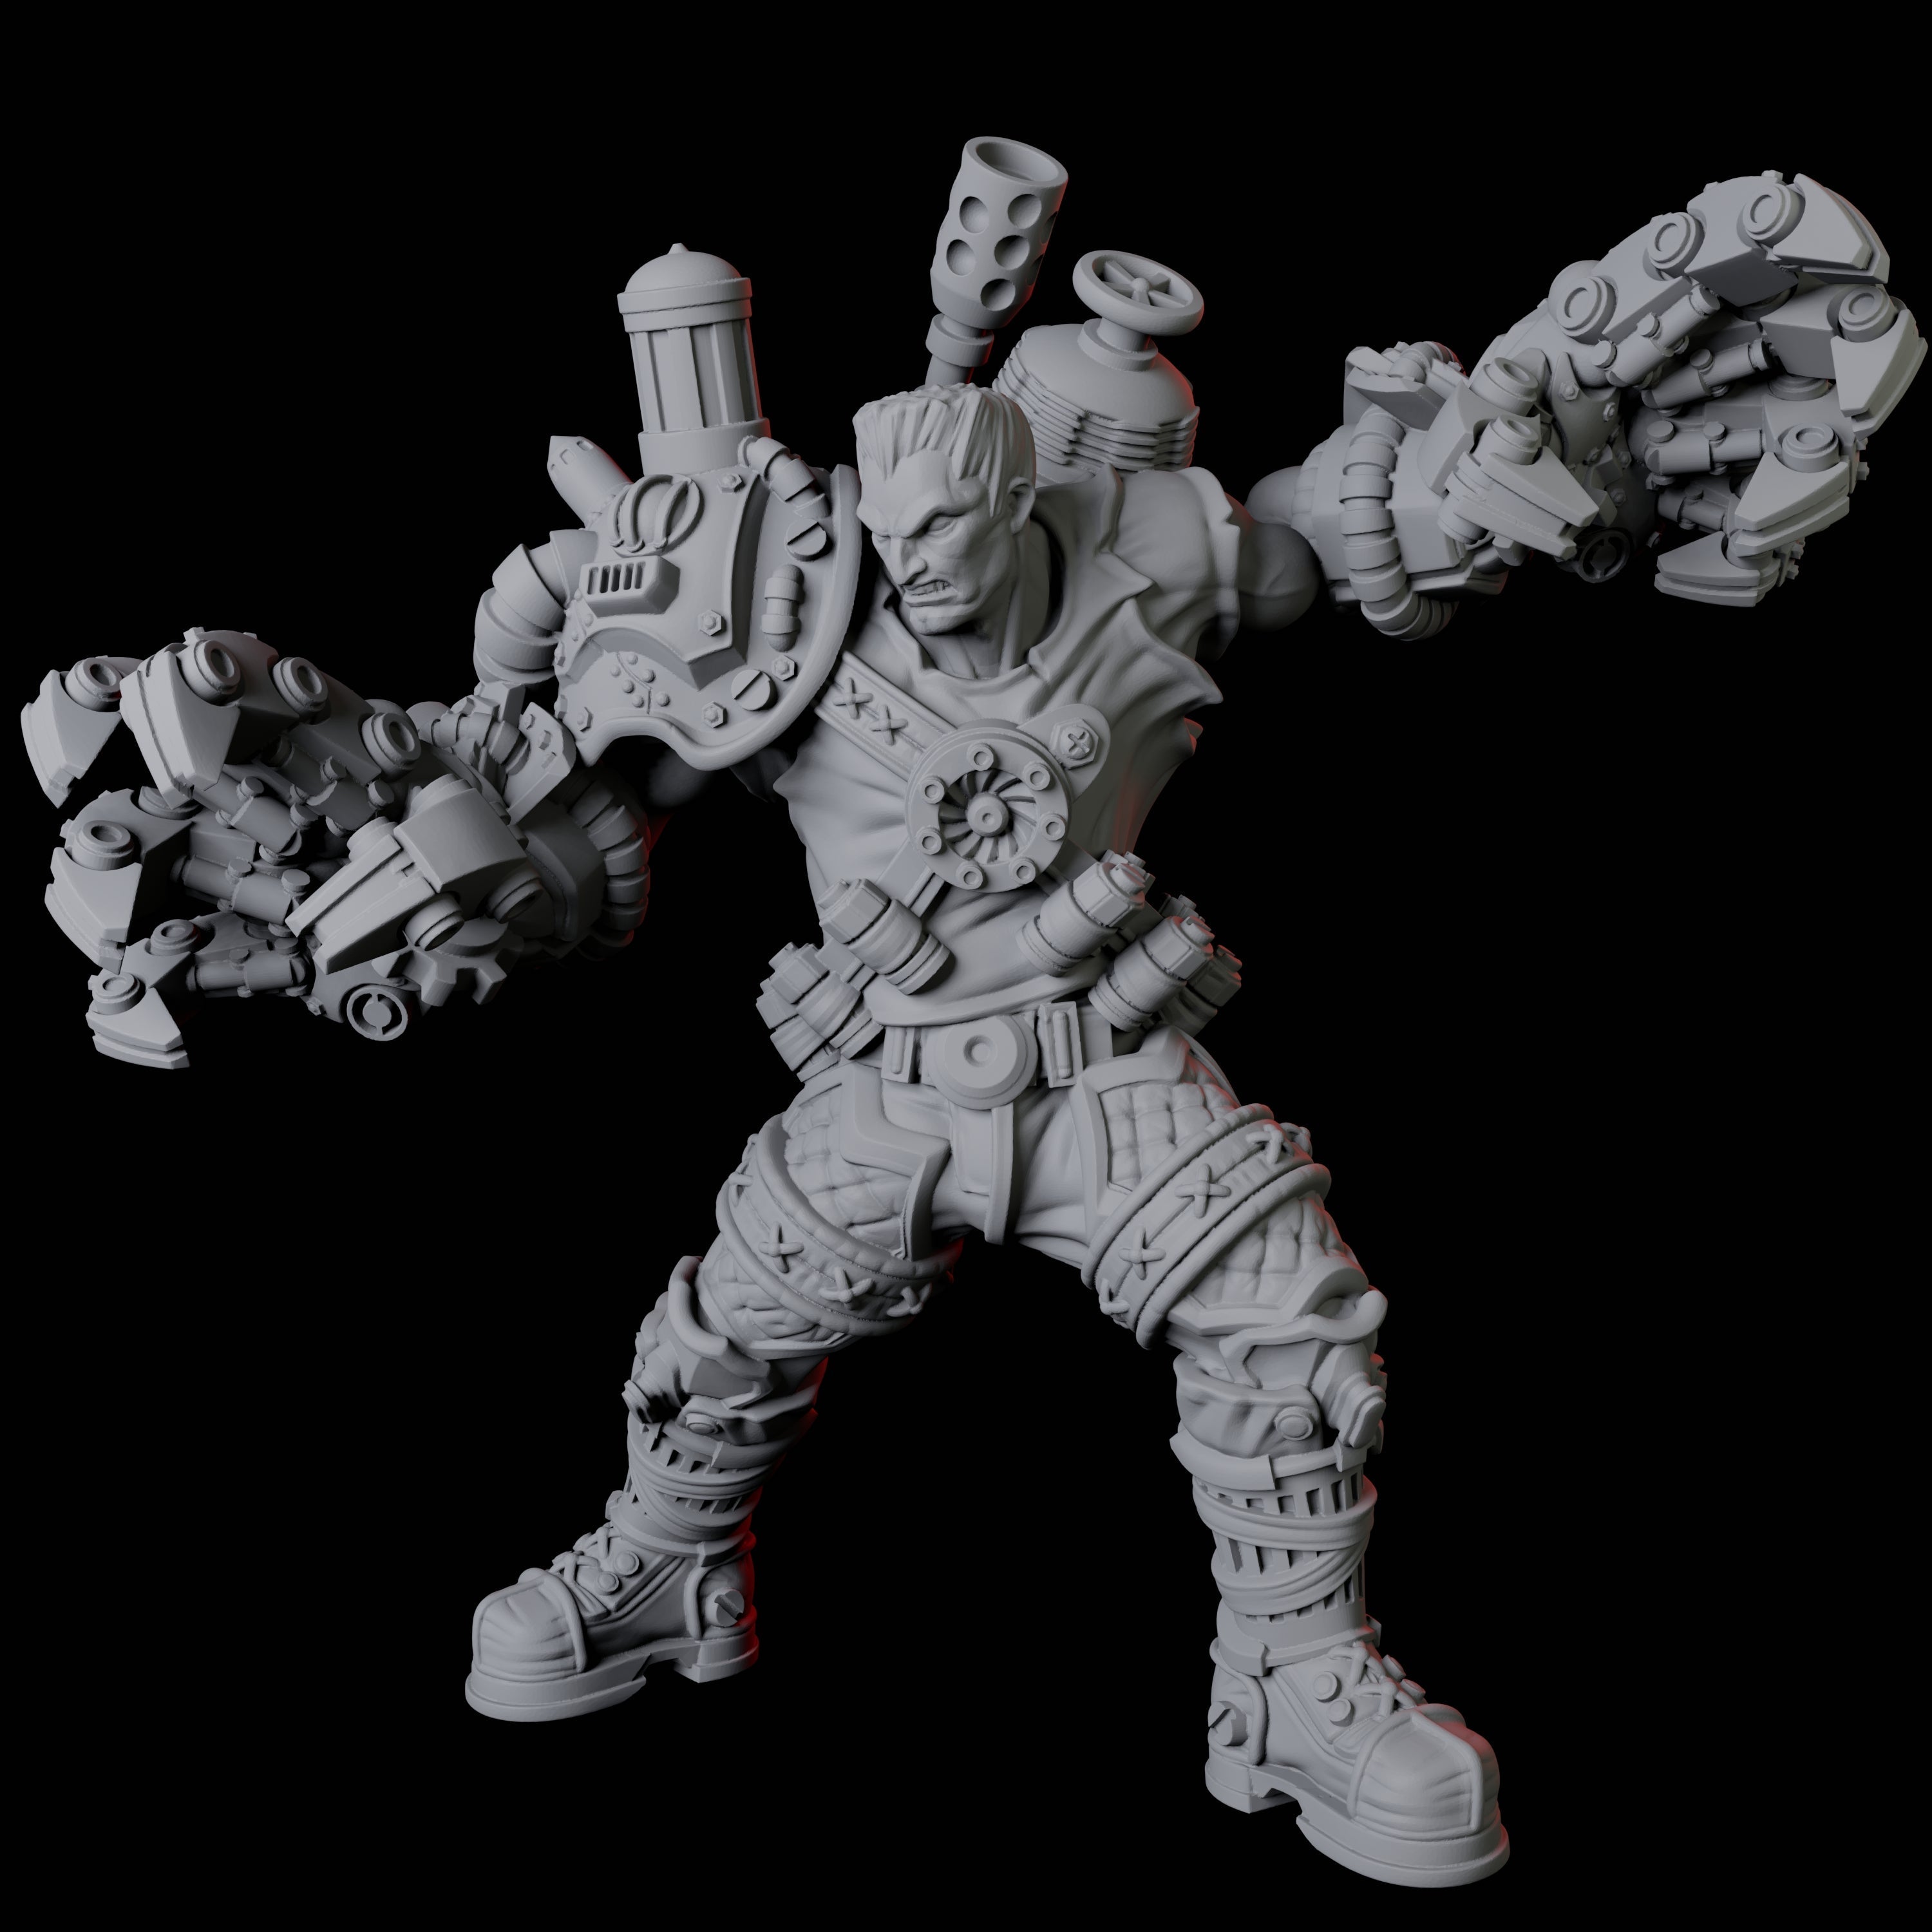 Goliath Cyborg Miniature for Dungeons and Dragons